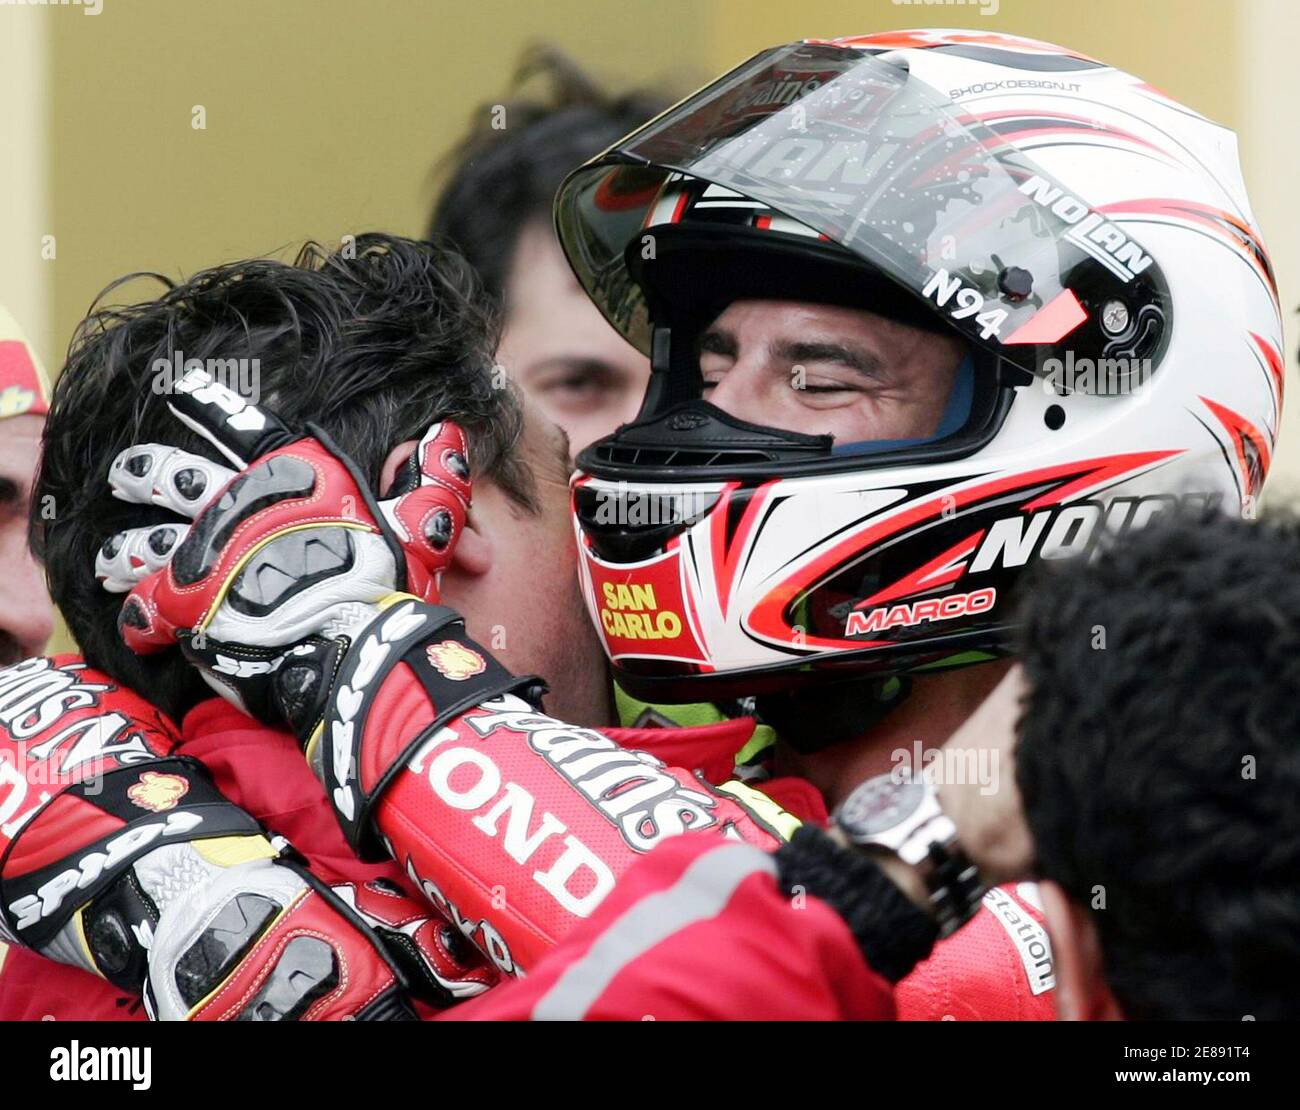 MotoGP rider Marco Melandri of Italy celebrates with his team members after  winning the Turkish Grand Prix in Istanbul Park in Istanbul April 30, 2006.  Melandri won the MotoGP Turkish Grand Prix